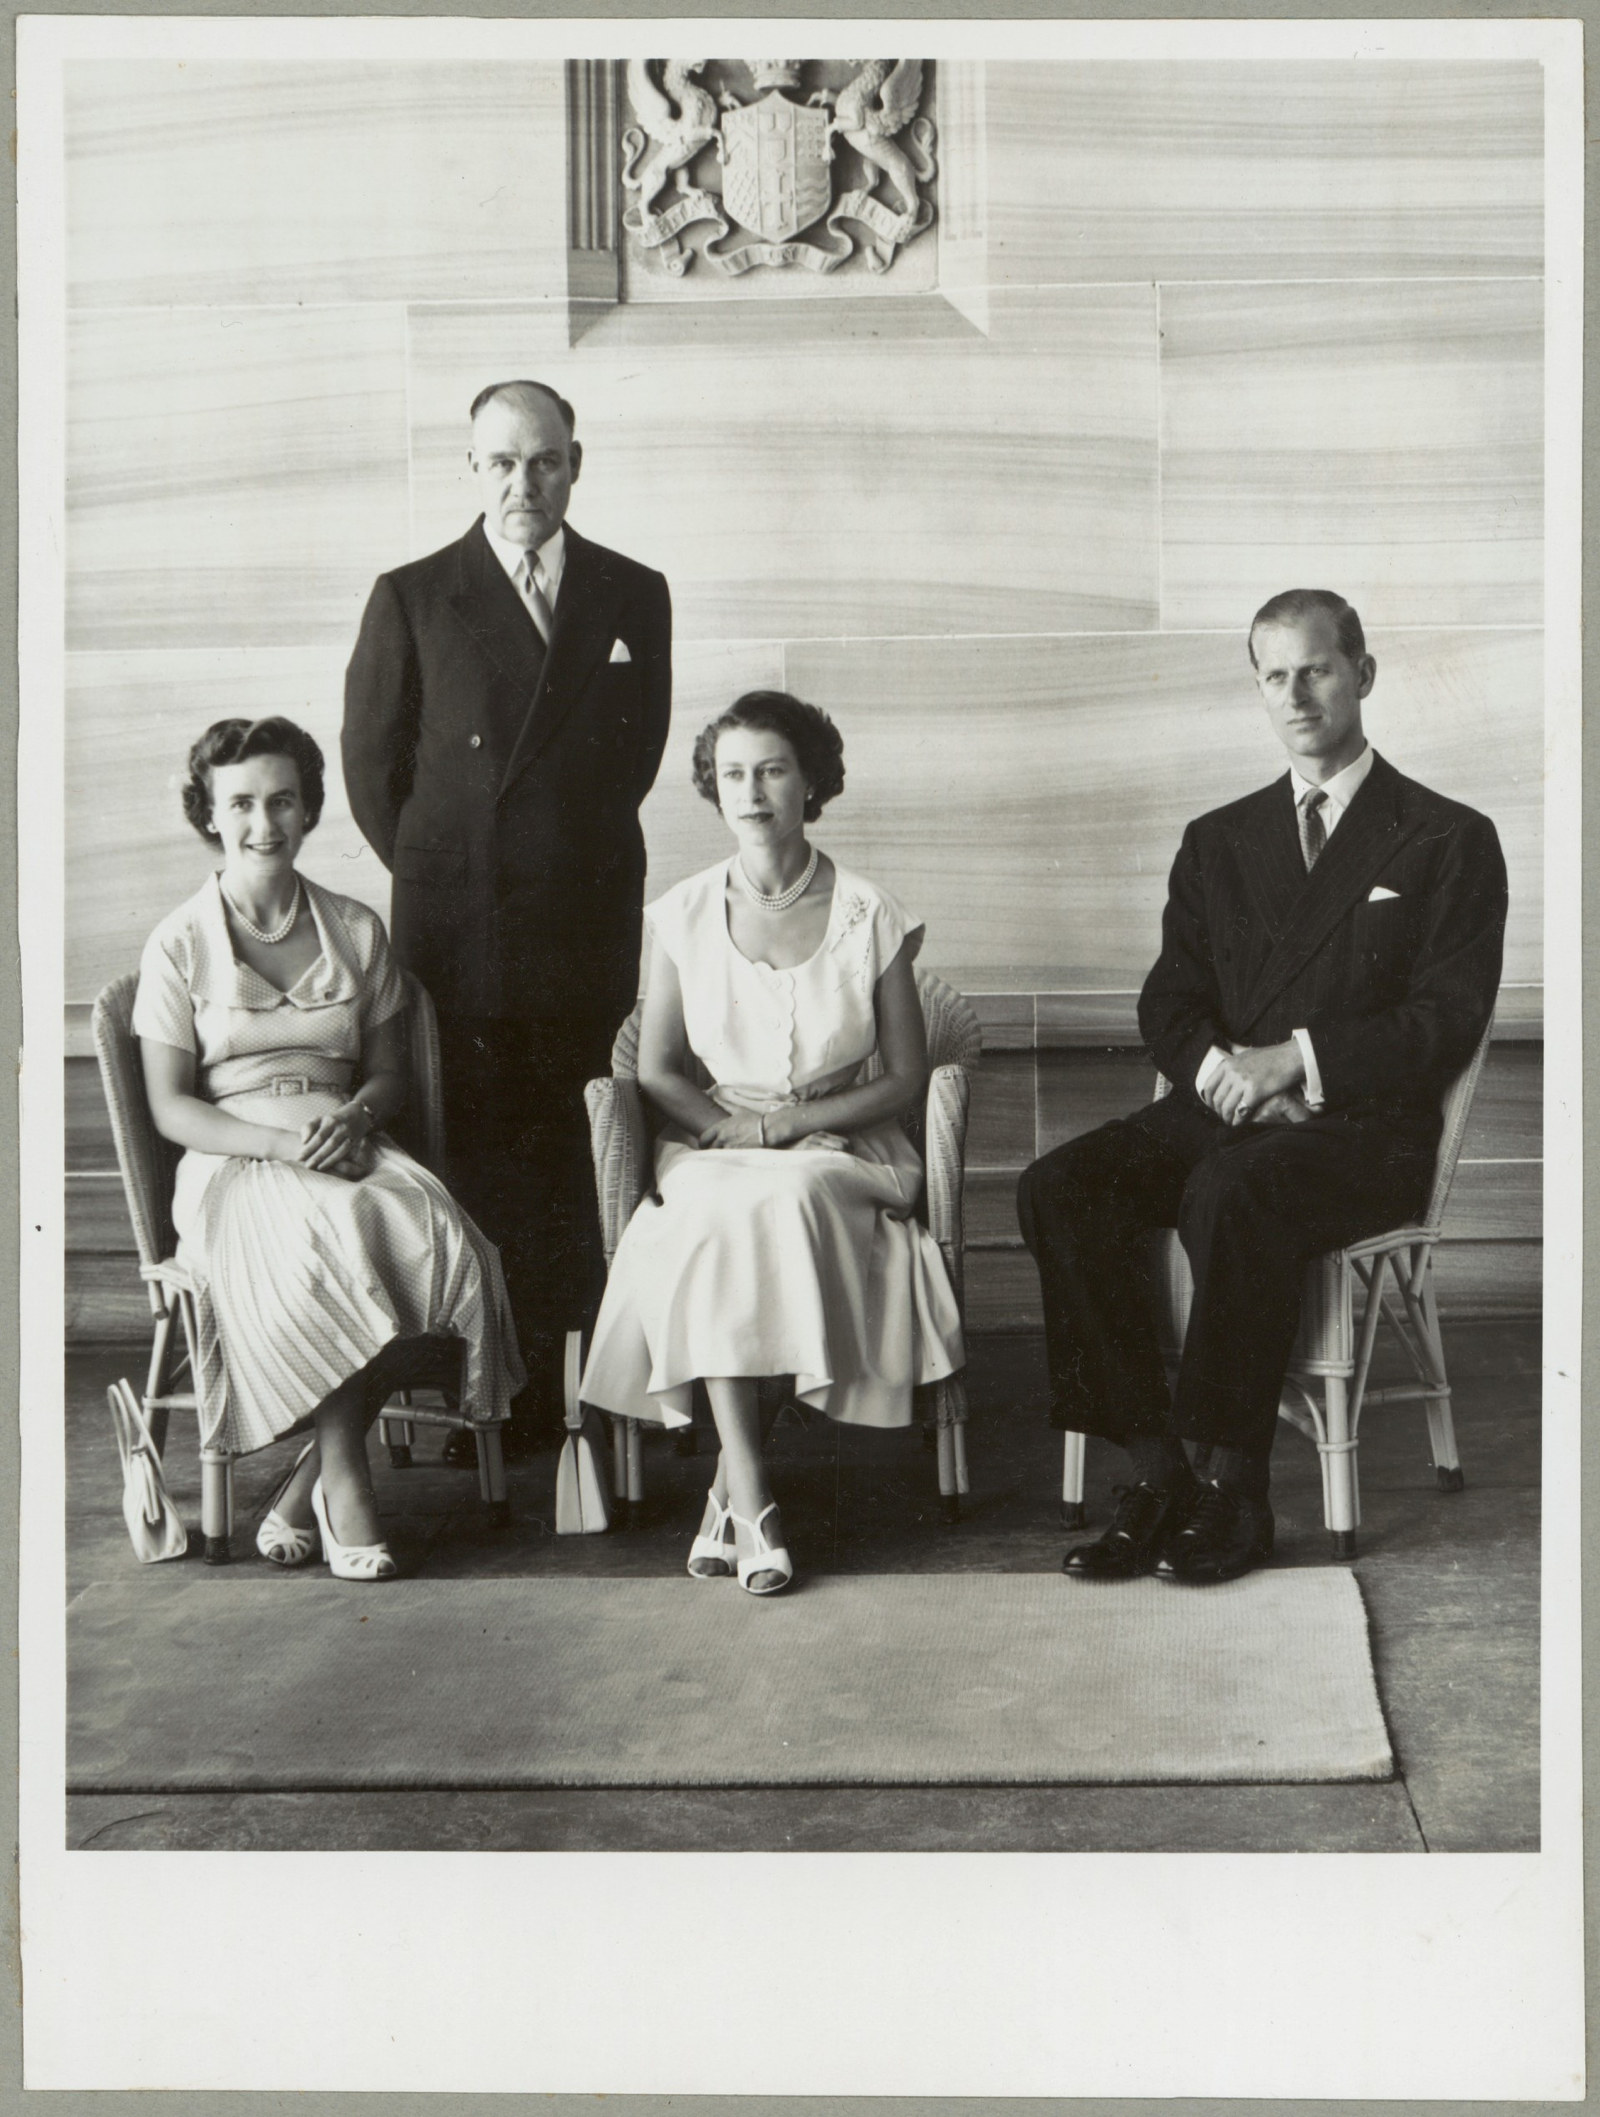 Queen Elizabeth II and Prince Phillip with Sir John Northcott and Mary Northcott